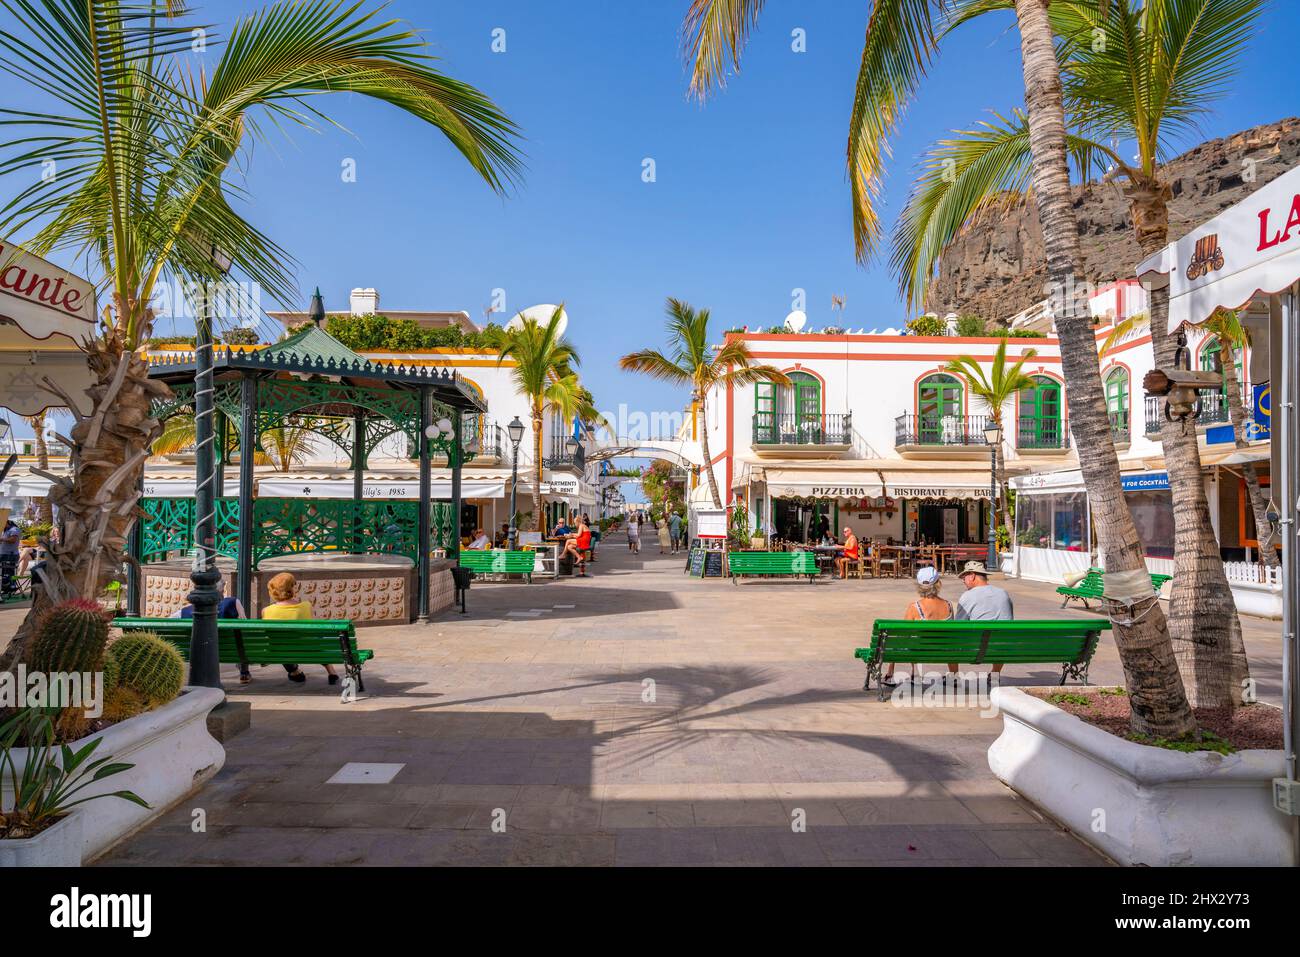 View of cafes and shops along the promenade in the old town, Puerto de Mogan, Gran Canaria, Canary Islands, Spain, Europe Stock Photo